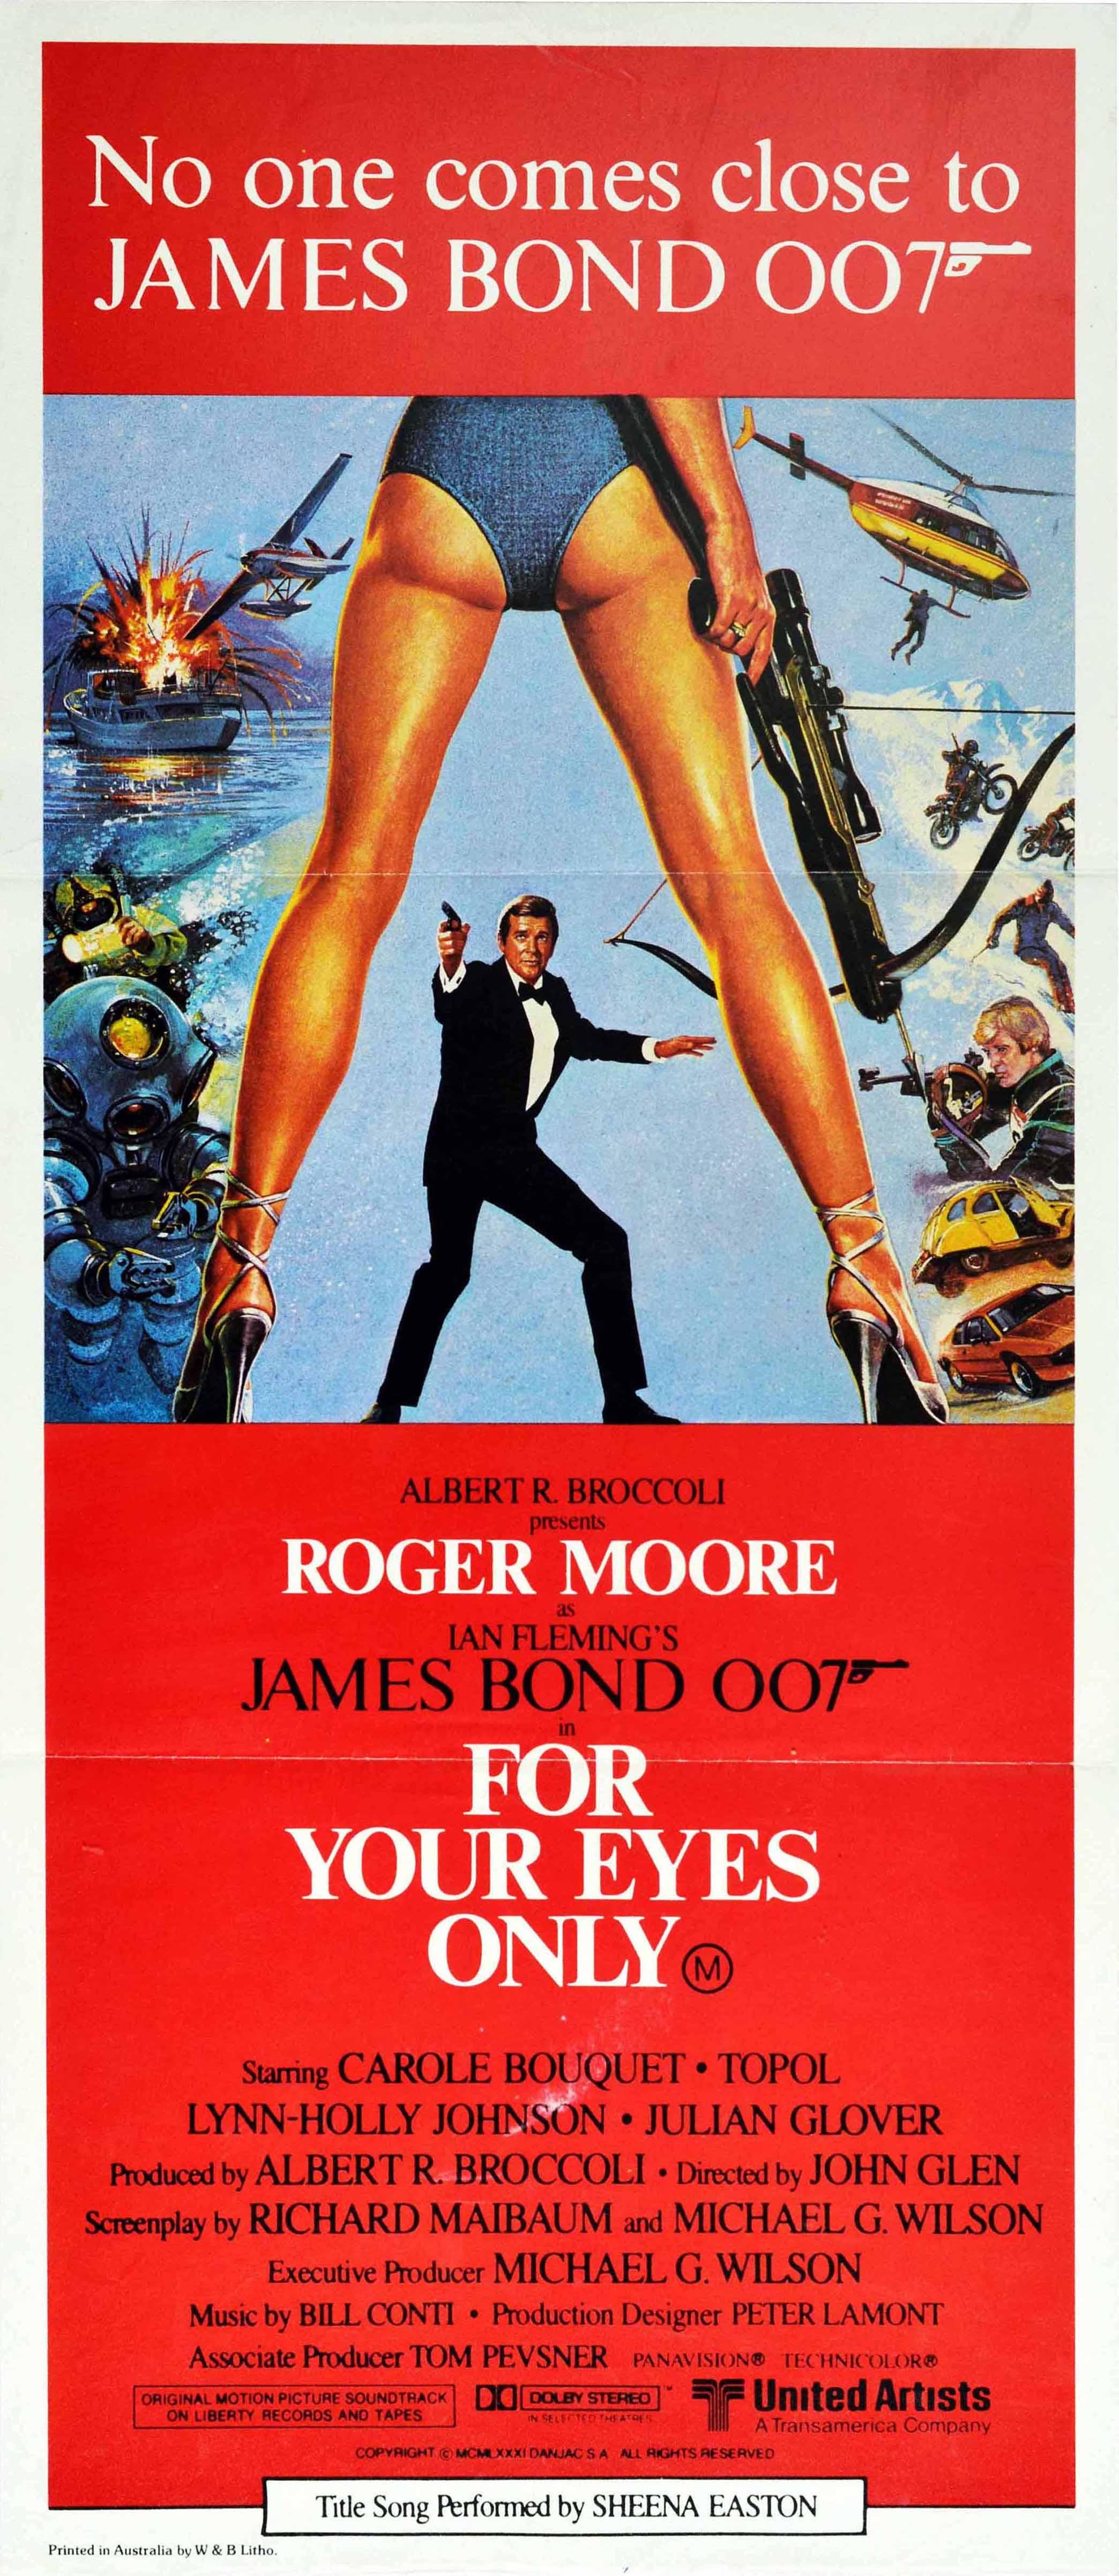 Original vintage film poster for the Australian release of the 007 movie For Your Eyes Only starring Roger Moore, Carole Bouquet and Chaim Topol based on the novel by Ian Fleming 